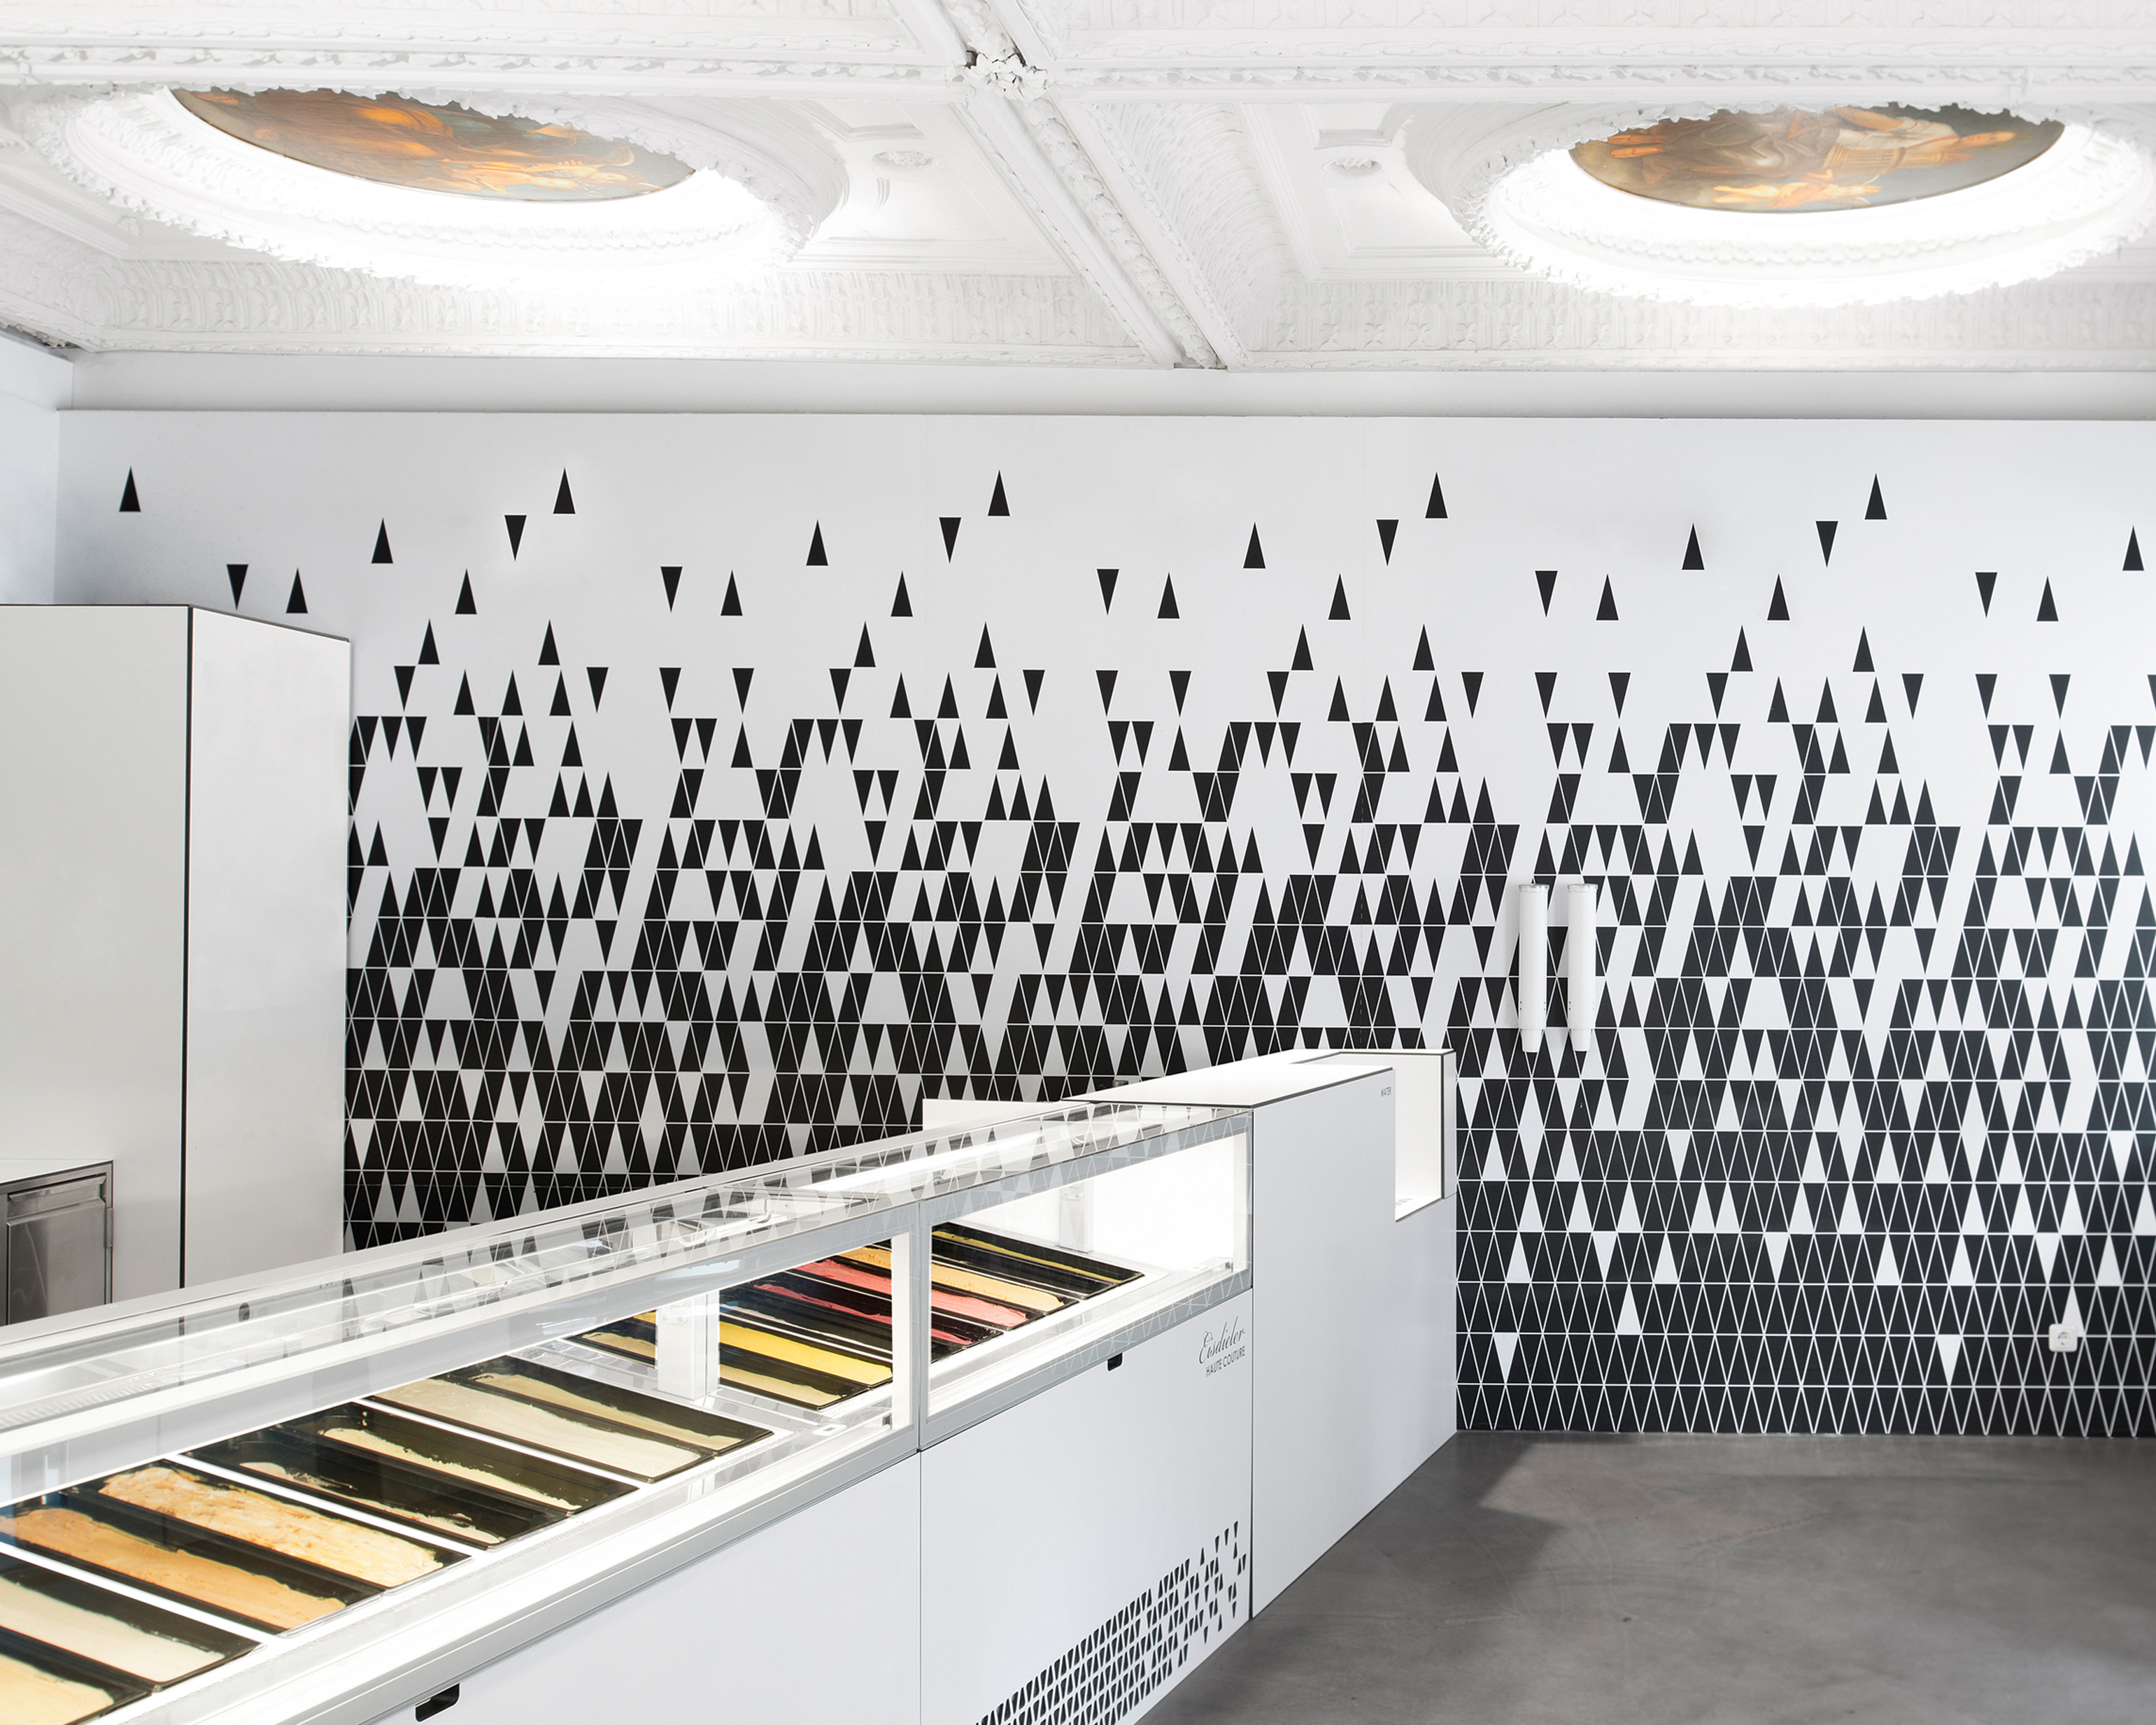 An ice cream display case in a parlour with a black and white patterned wall at the end of it in Eisdieler, Austria